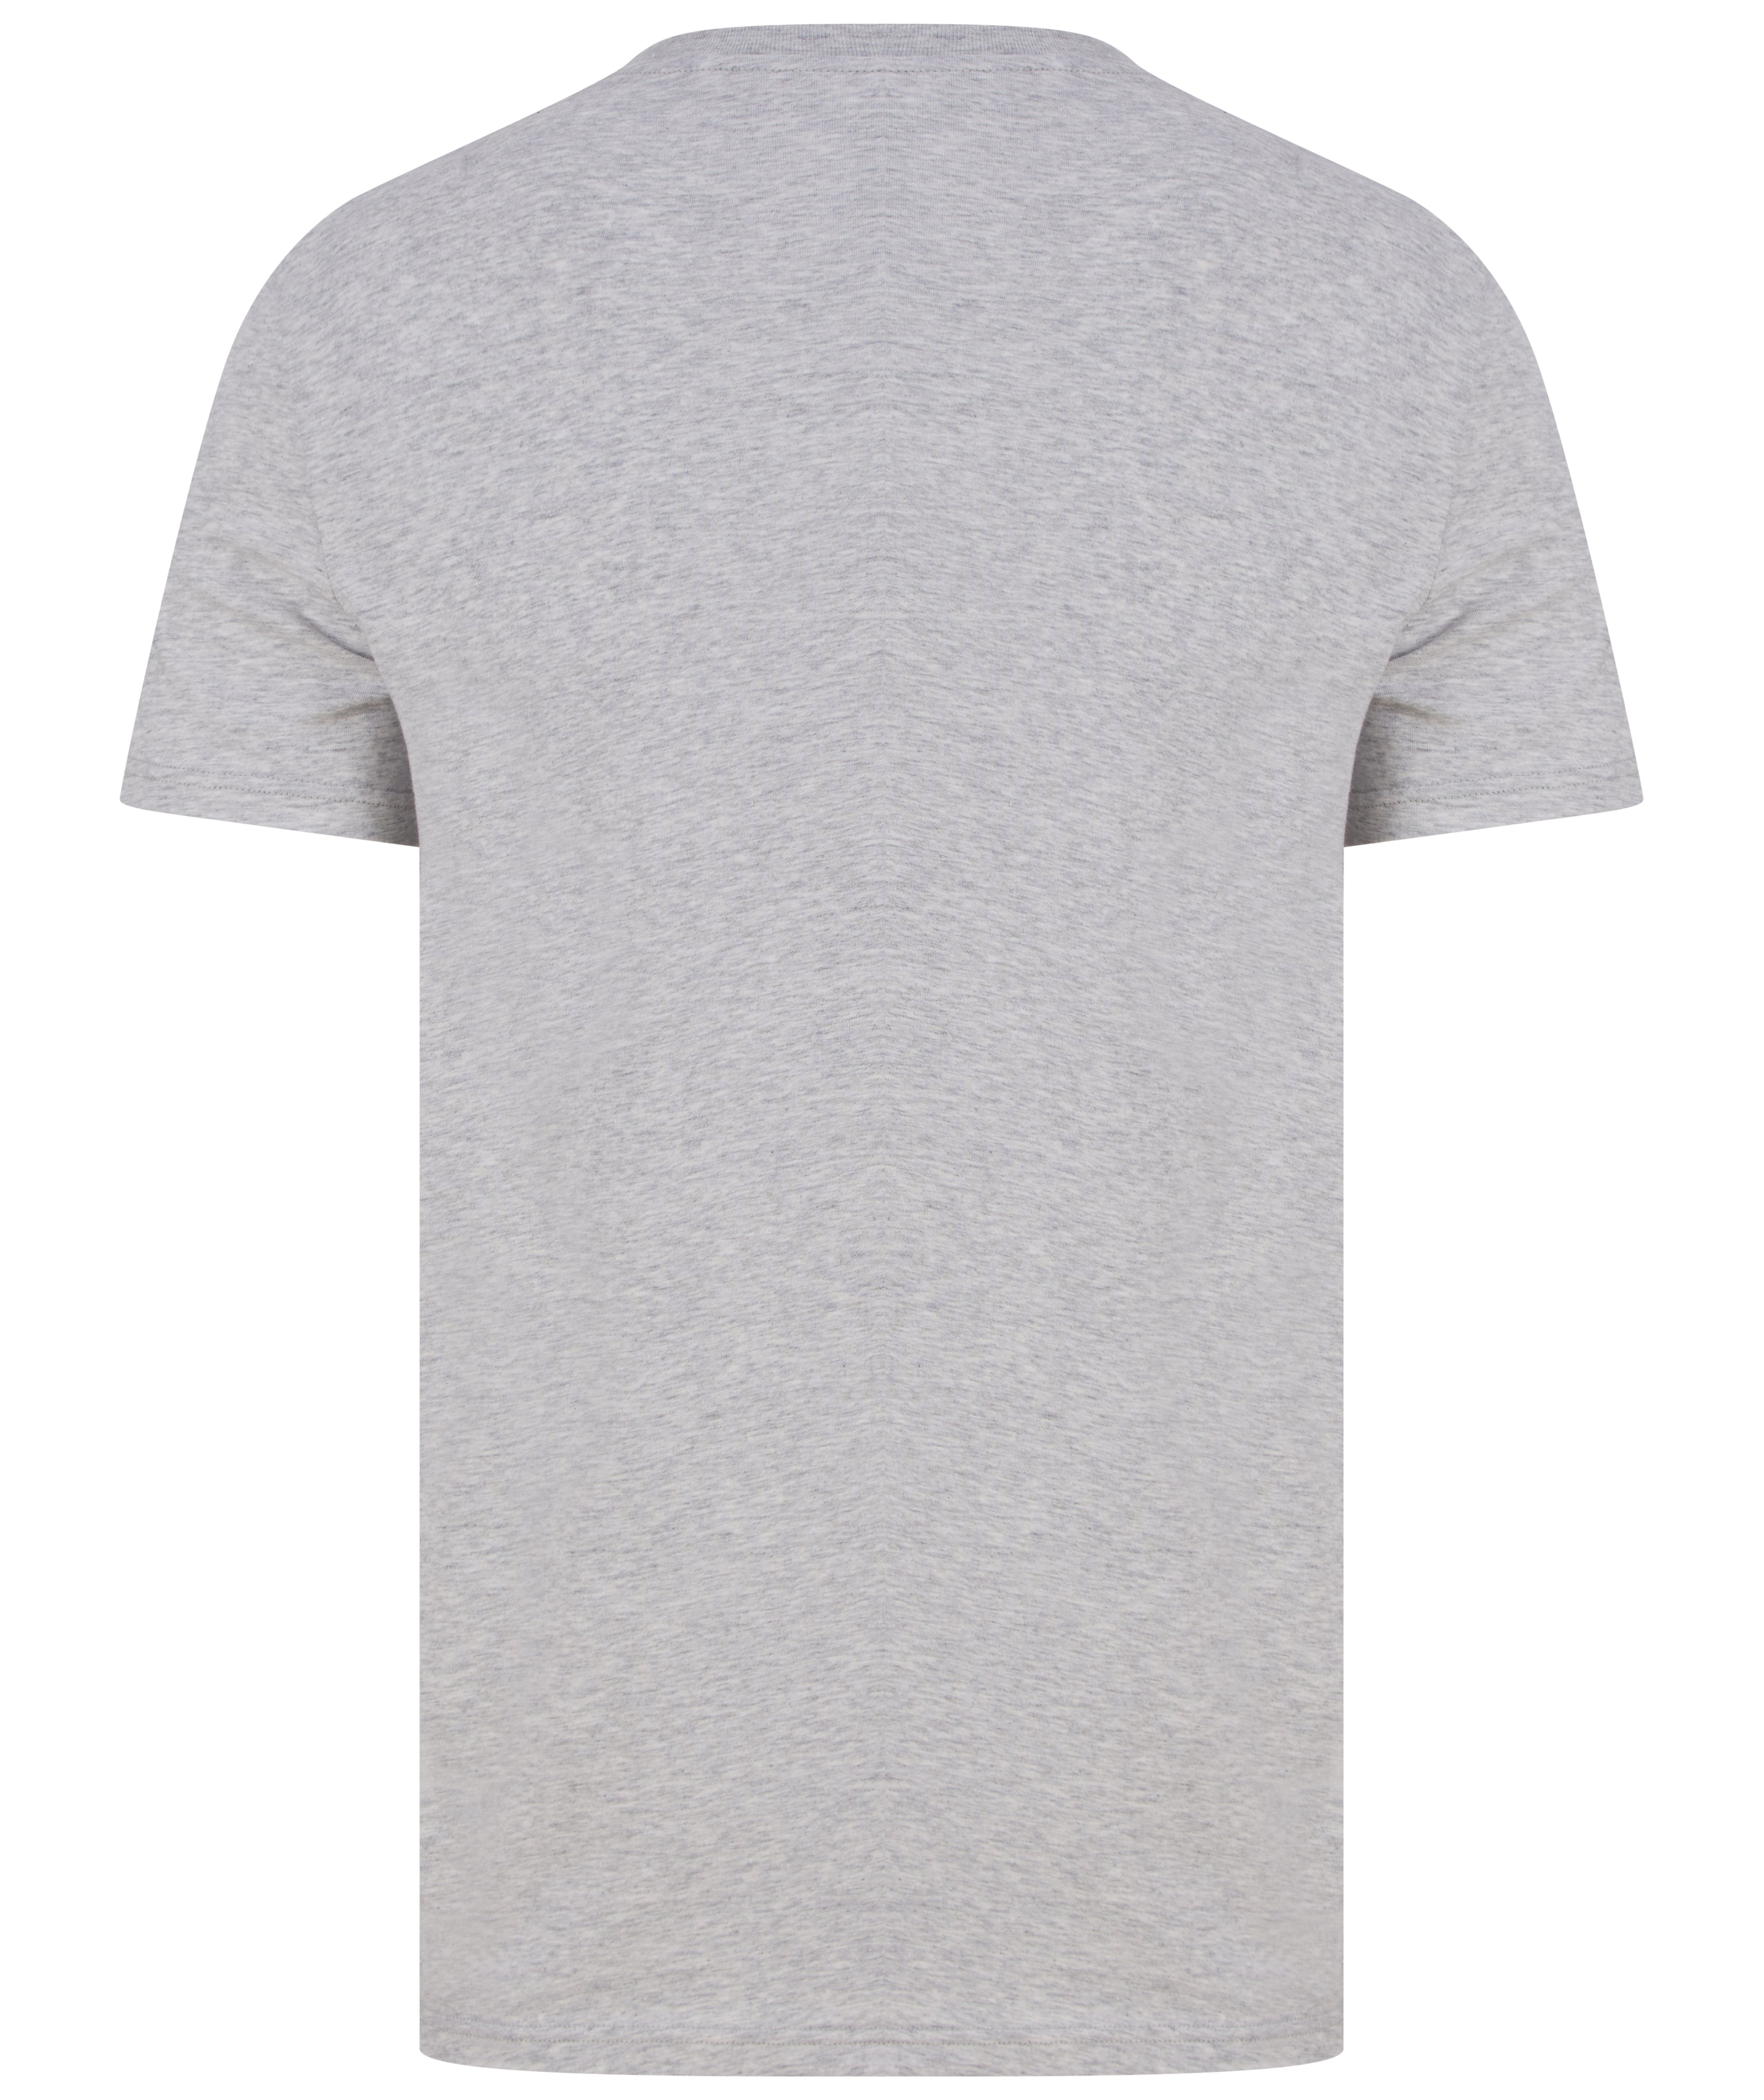 Load image into Gallery viewer, DSquared2 DSQ2 Small Logo Tee Grey
